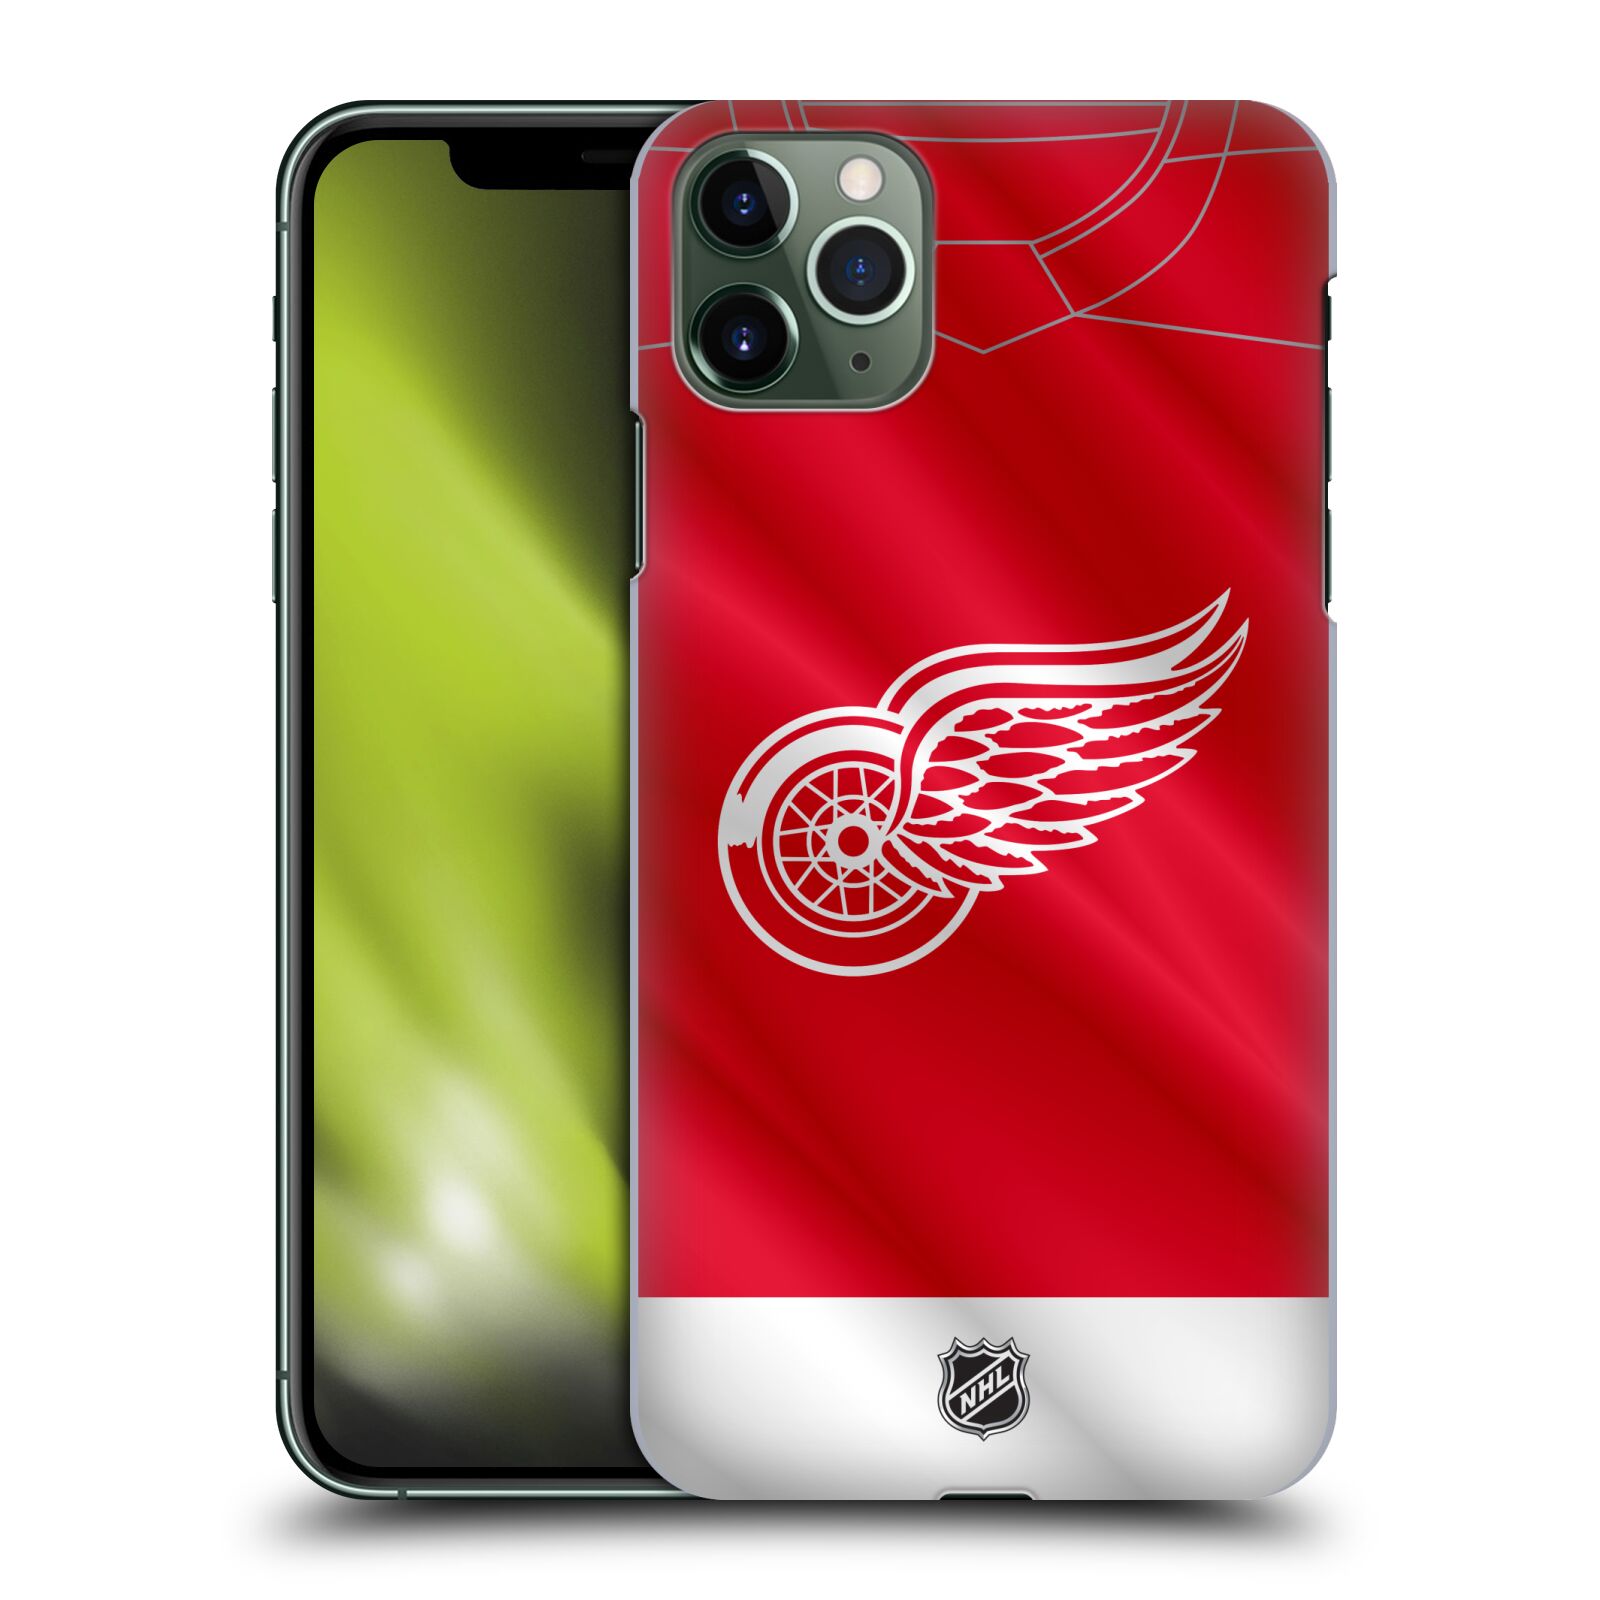 Pouzdro na mobil Apple Iphone 11 PRO MAX - HEAD CASE - Hokej NHL - Detroit Red Wings - Dres